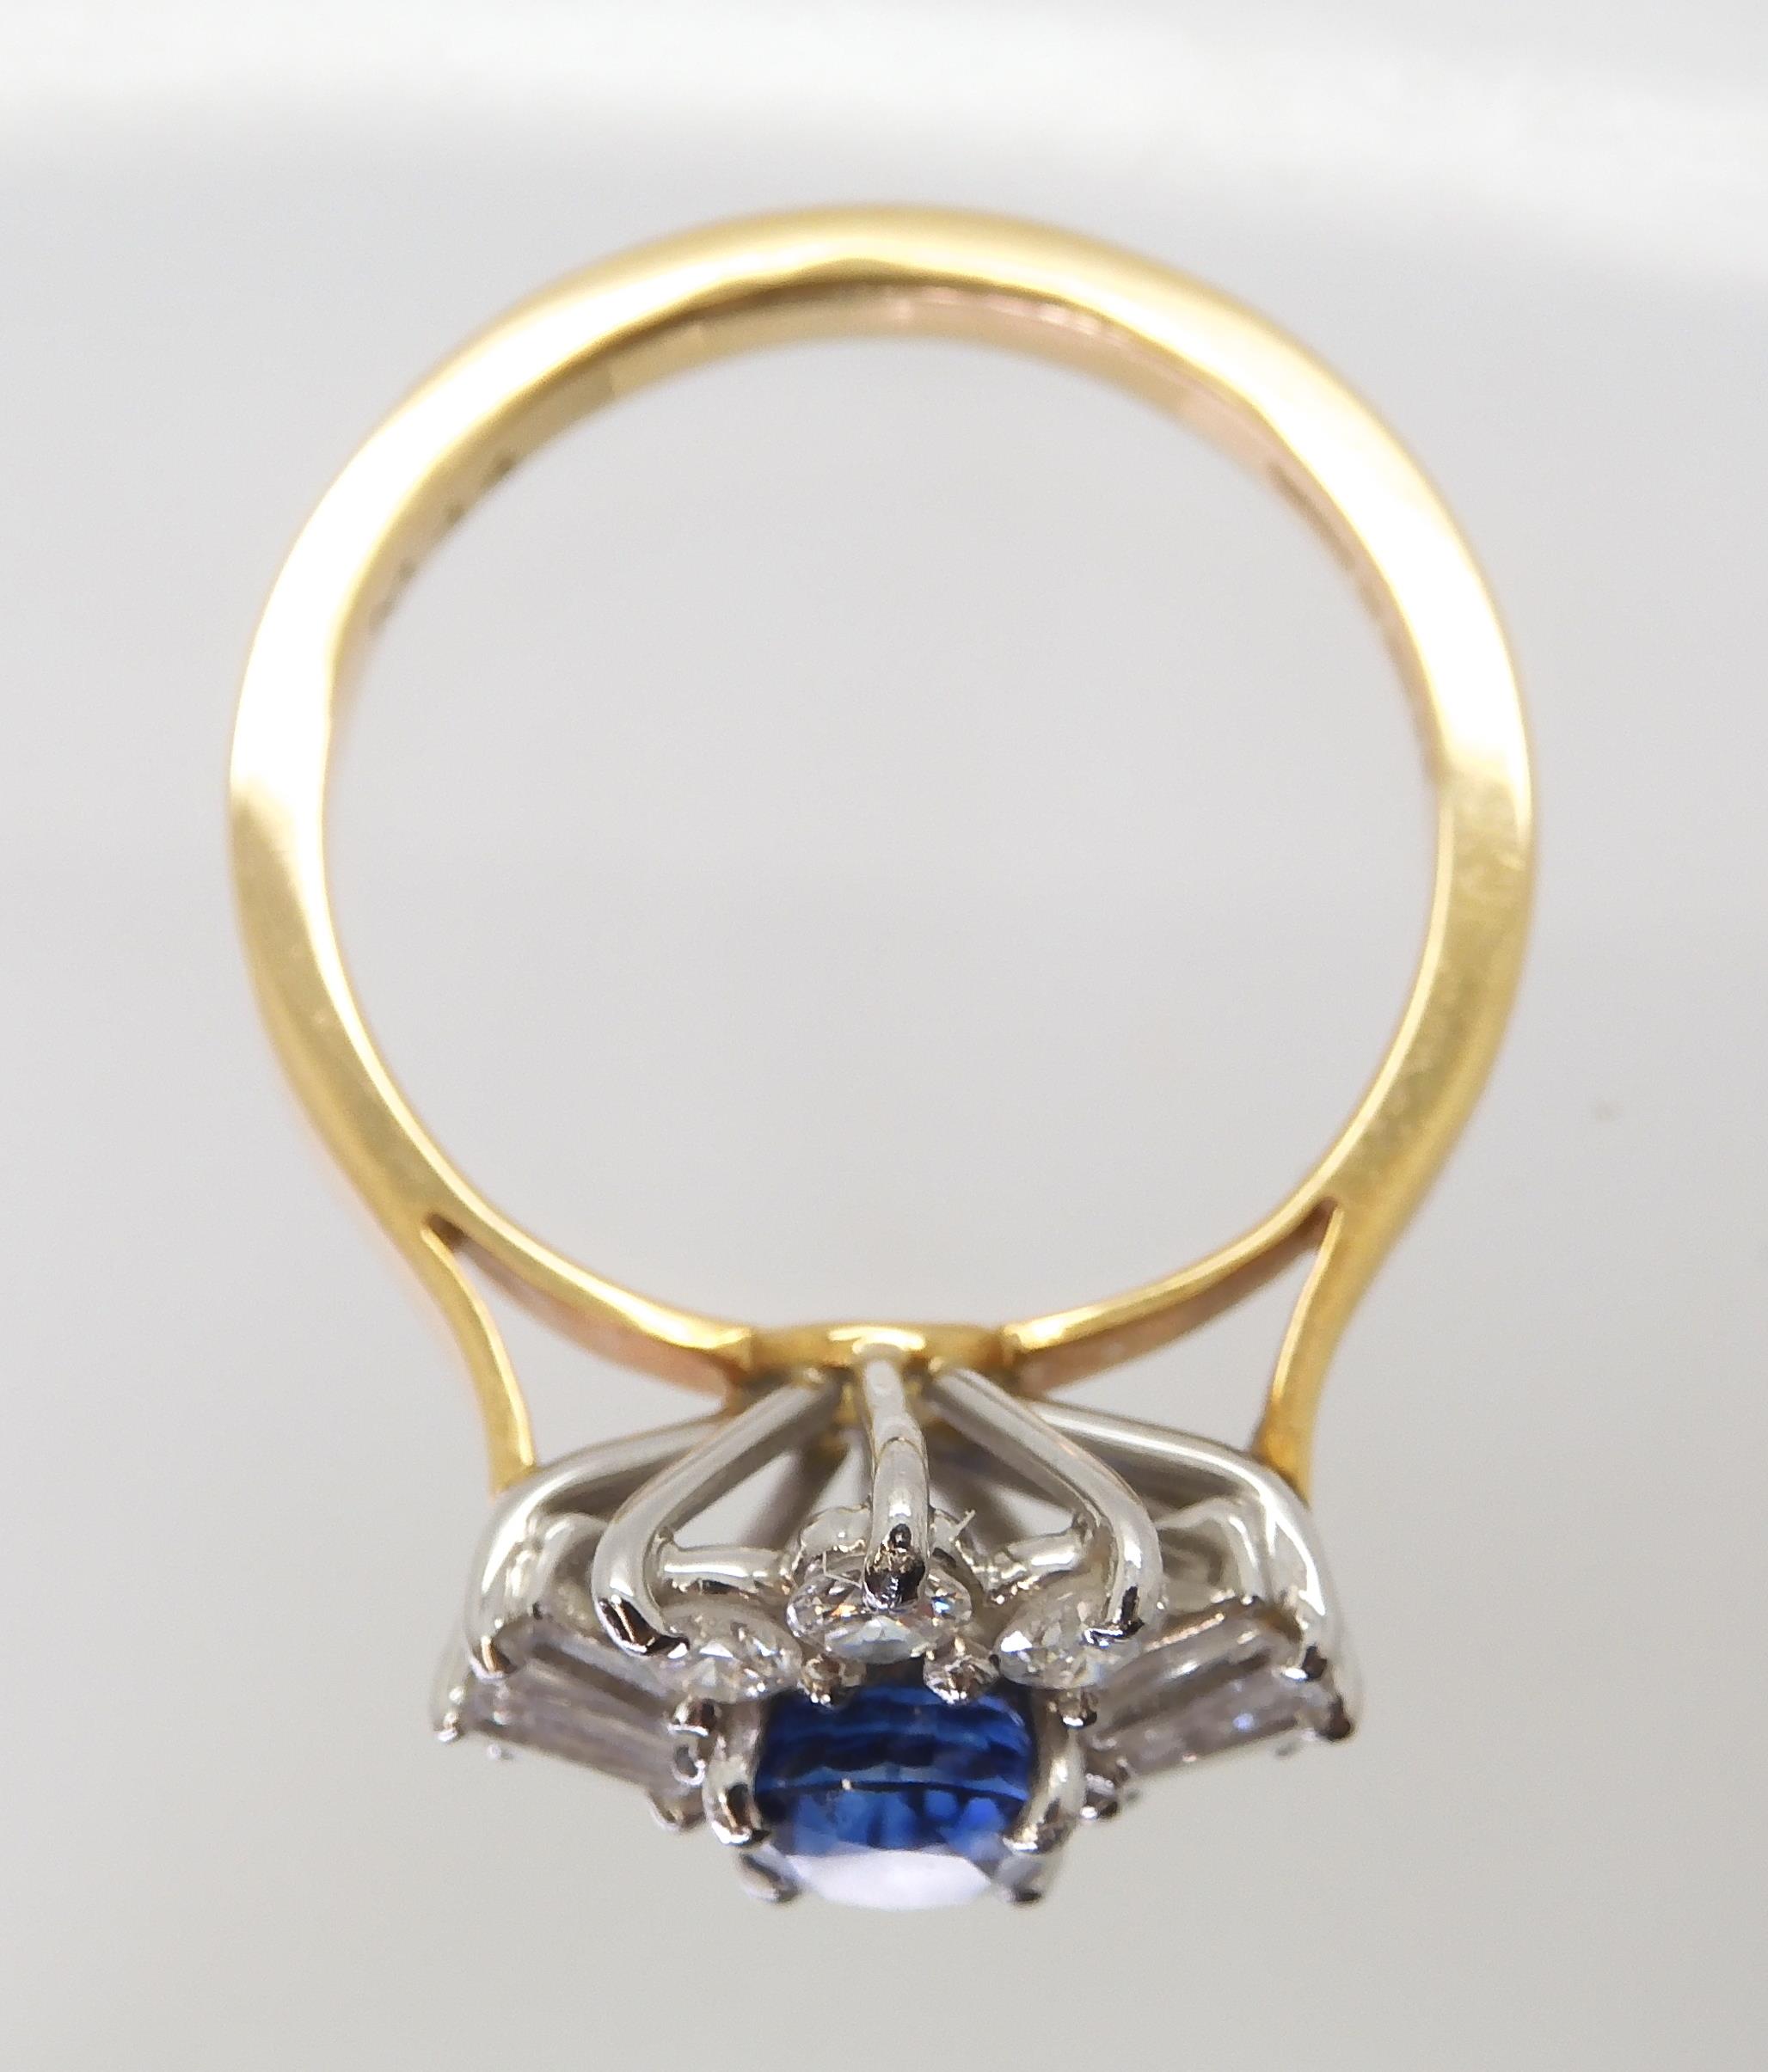 A SAPPHIRE & DIAMOND CLUSTER RING set in 18ct yellow and white gold, the starburst configuration - Image 5 of 8